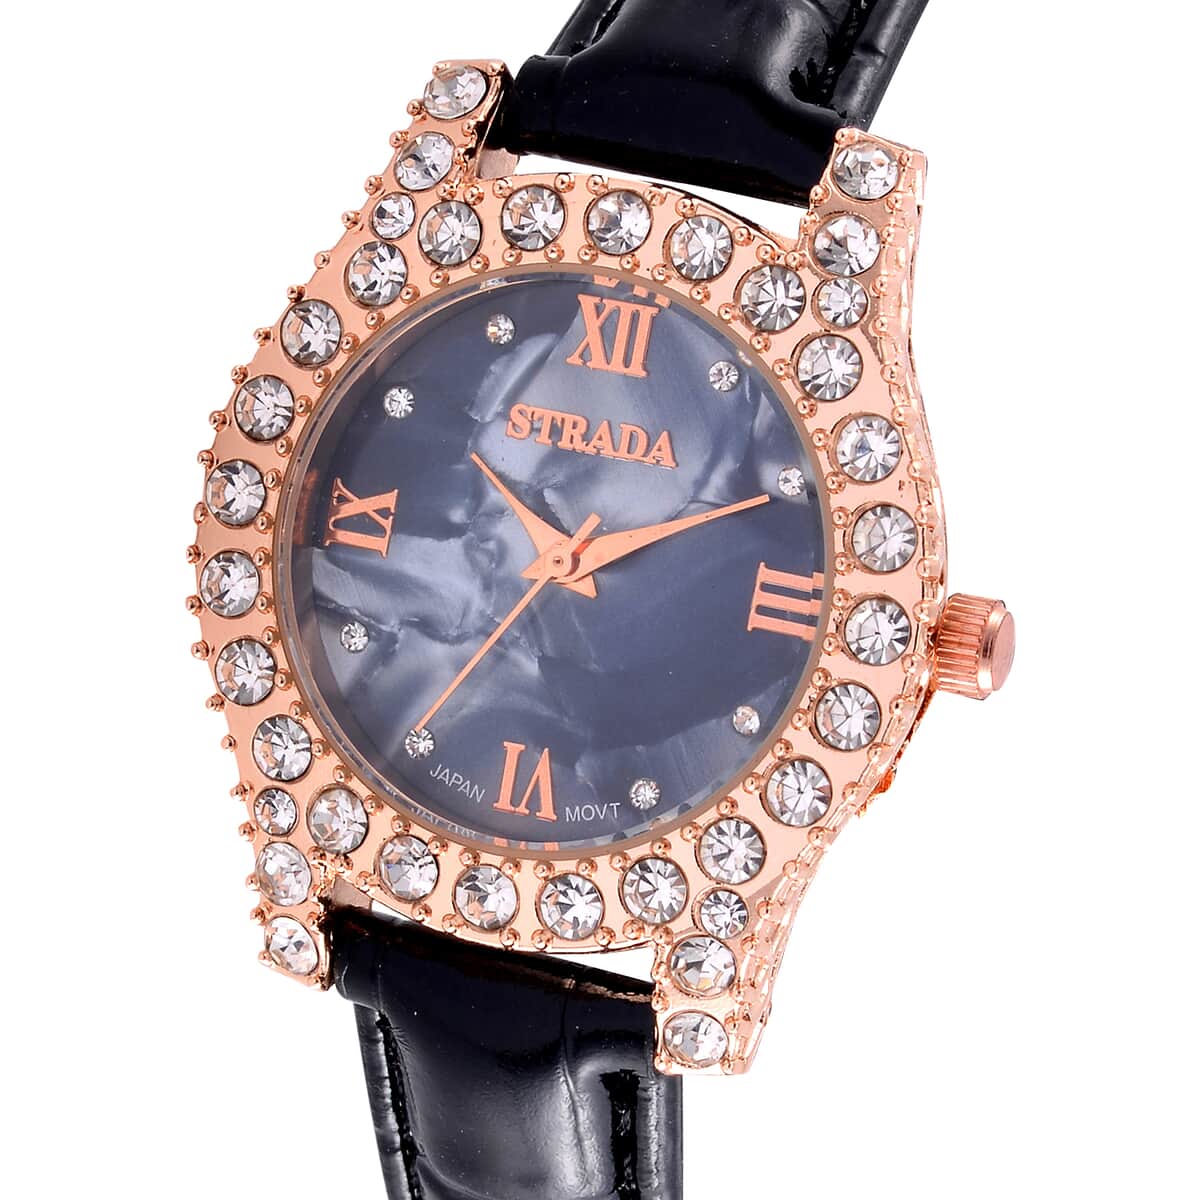 Strada Austrian Crystal Japanese Movement Watch in Rosetone with Black Faux Leather Strap (31.24 mm) (6.5-7.5 Inches) image number 3